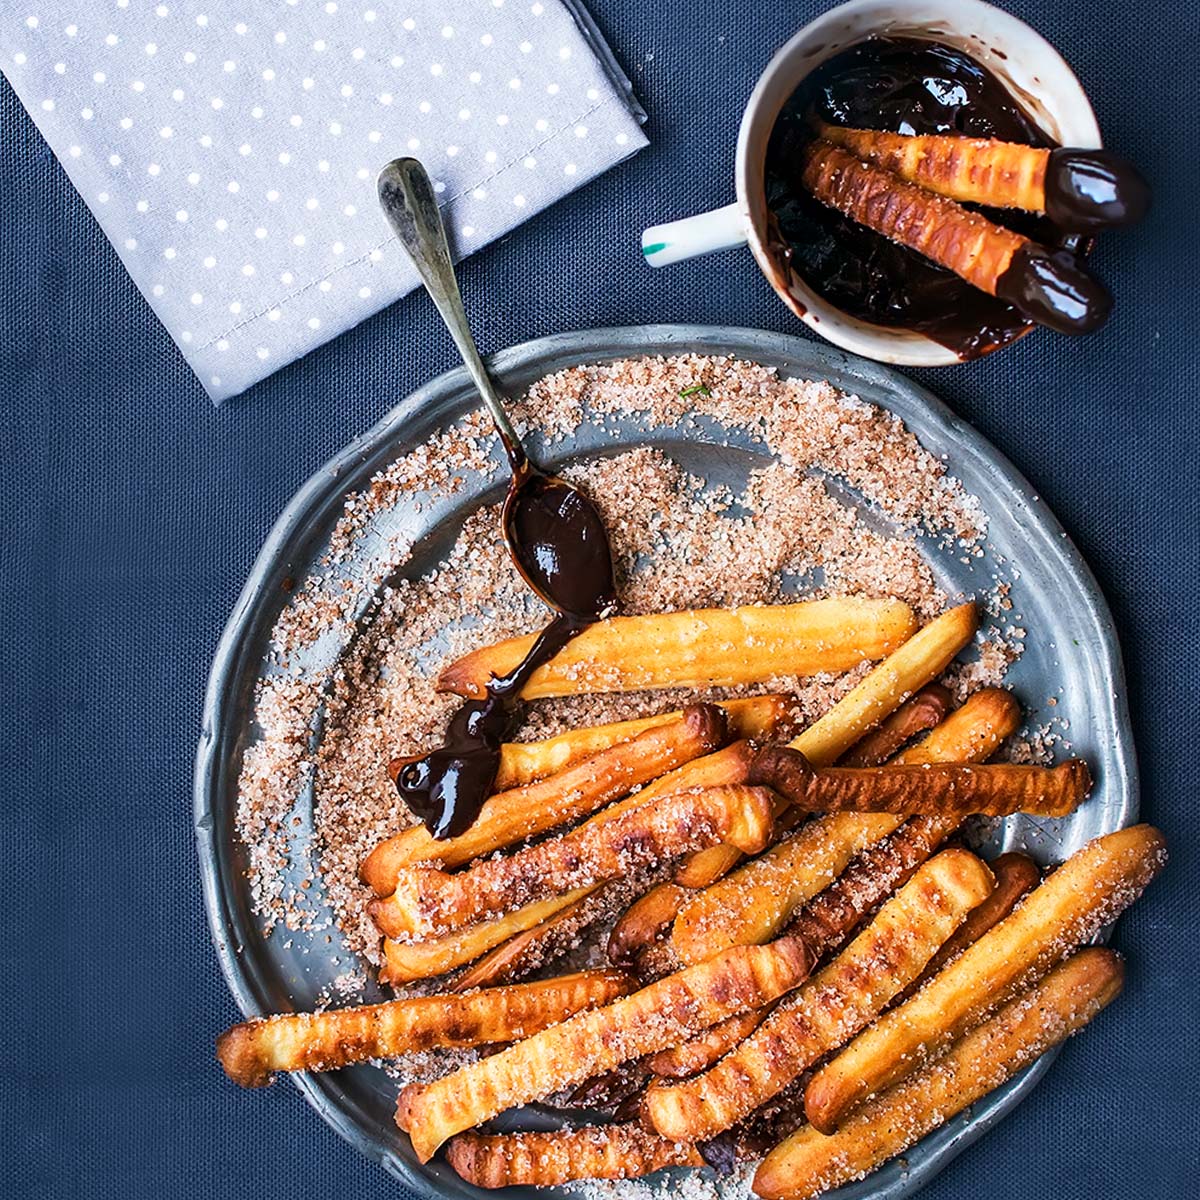 The crispiness of churros is one of the things that makes them so delicious. But it's also the quality that makes them tricky to reheat. Often, when churros are reheated, they become soft and soggy.